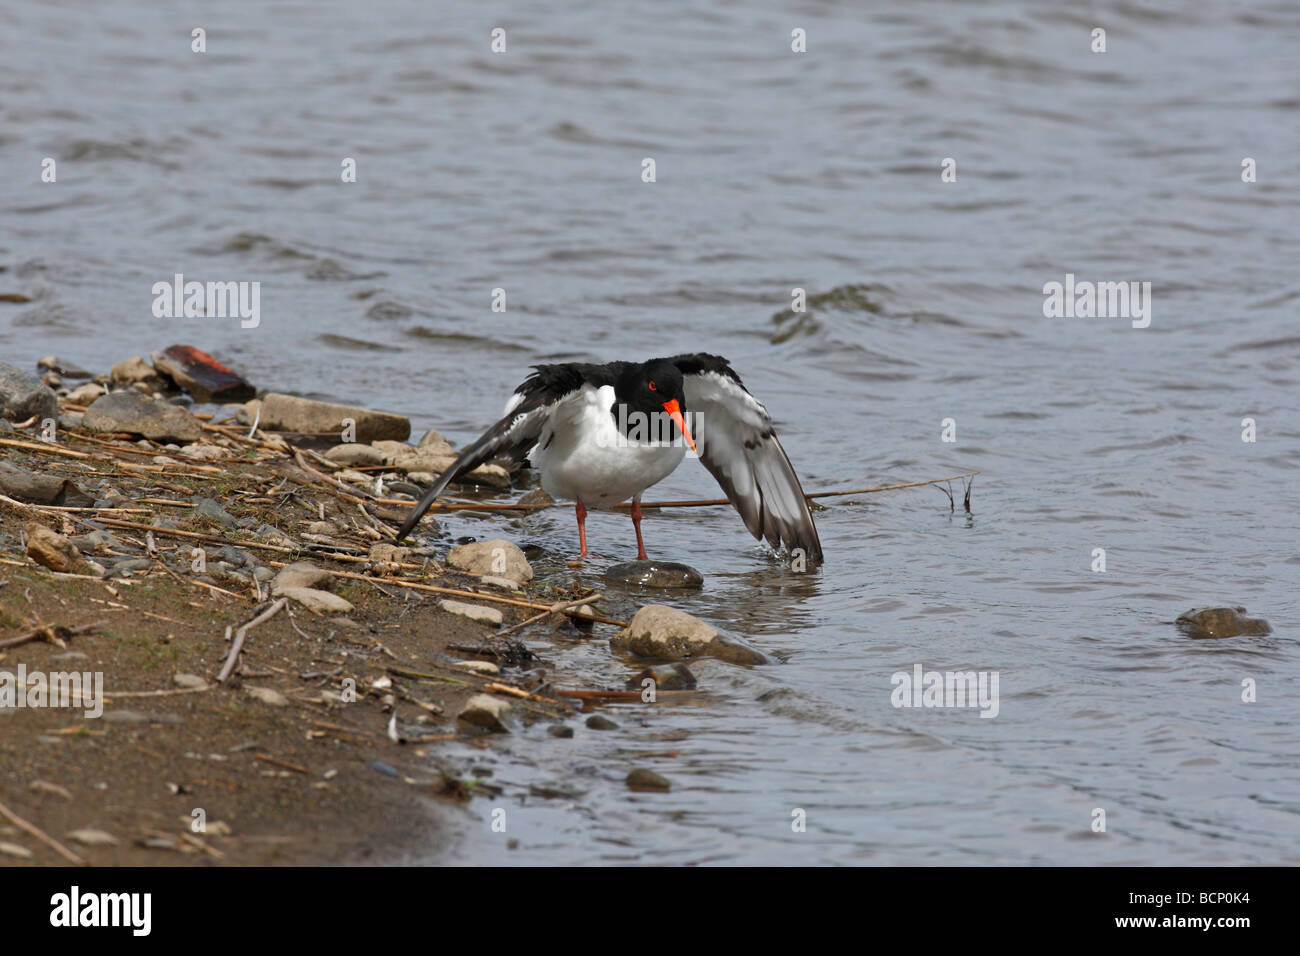 oyster catcher Haematopus ostralegus drying wings after bathing Stock Photo